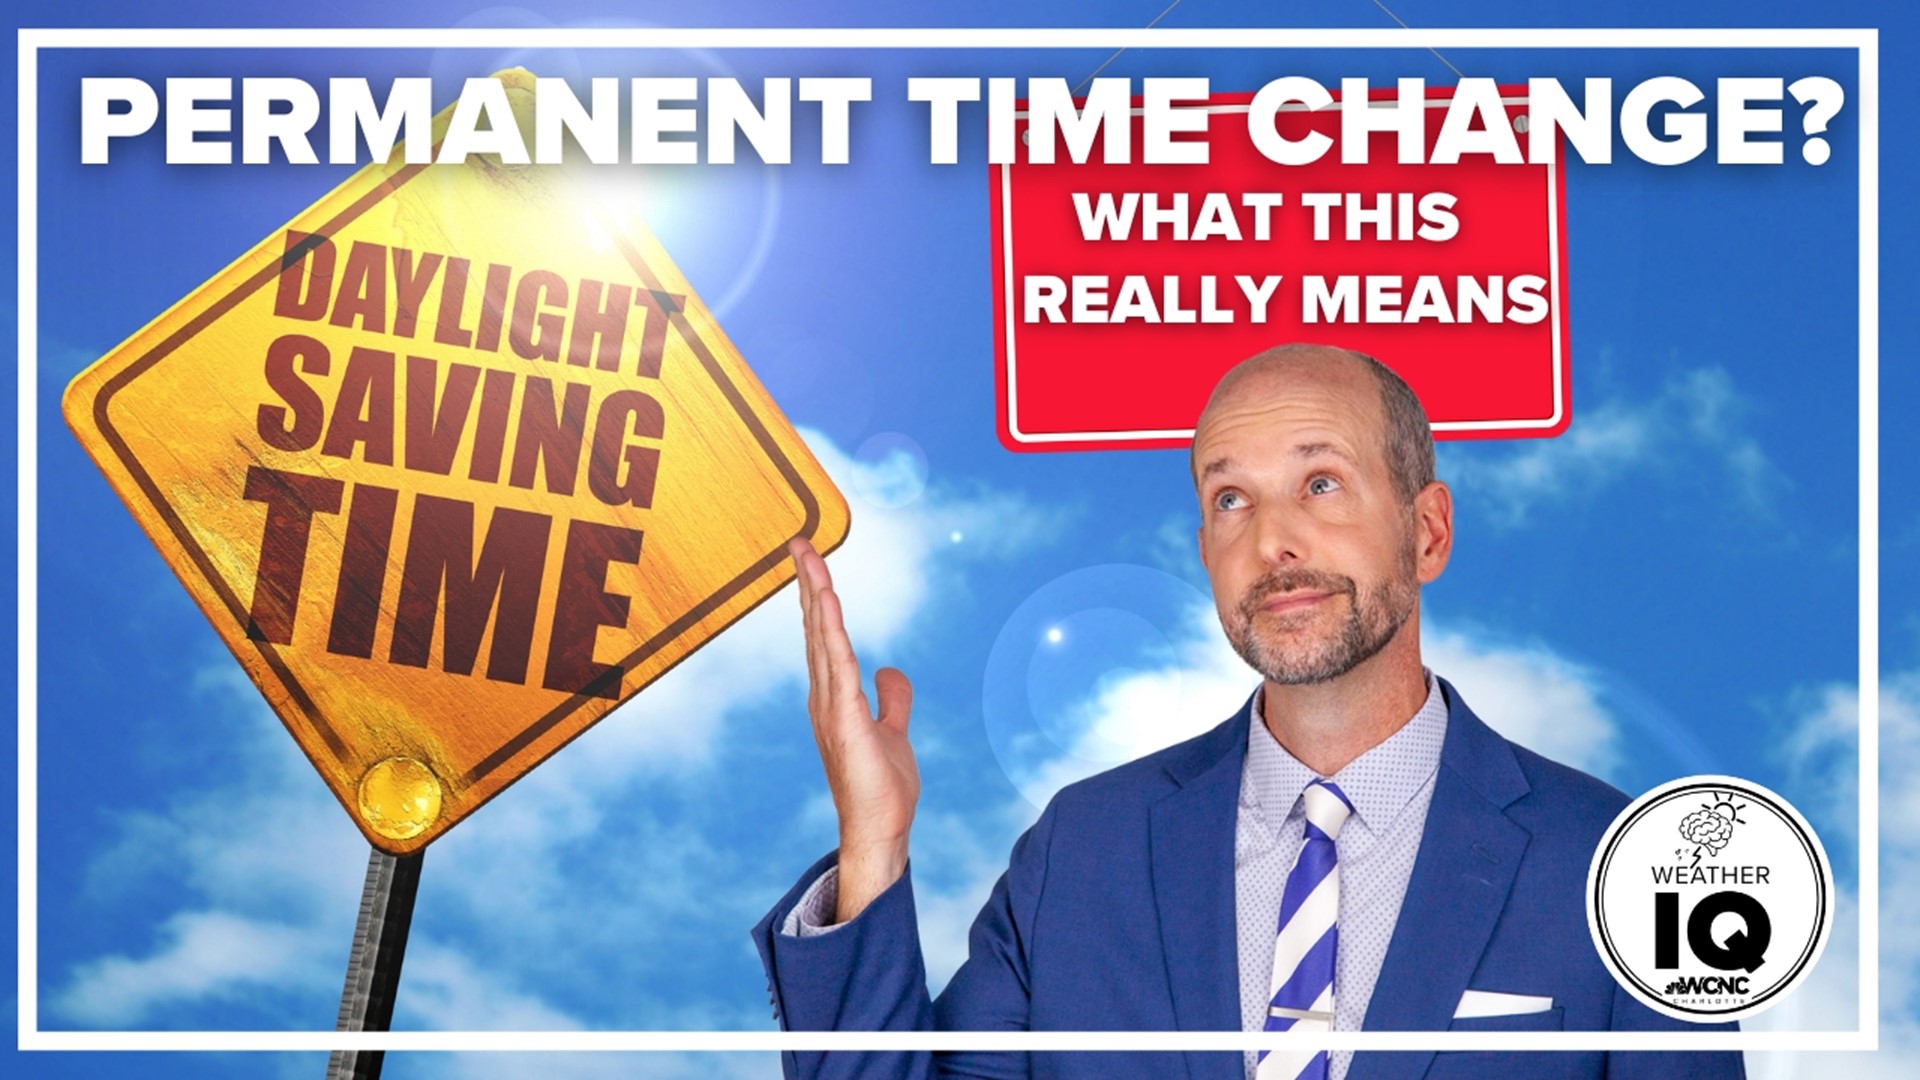 Brad Panovich explains the impact a permanent change to daylight saving time would mean for Charlotte.